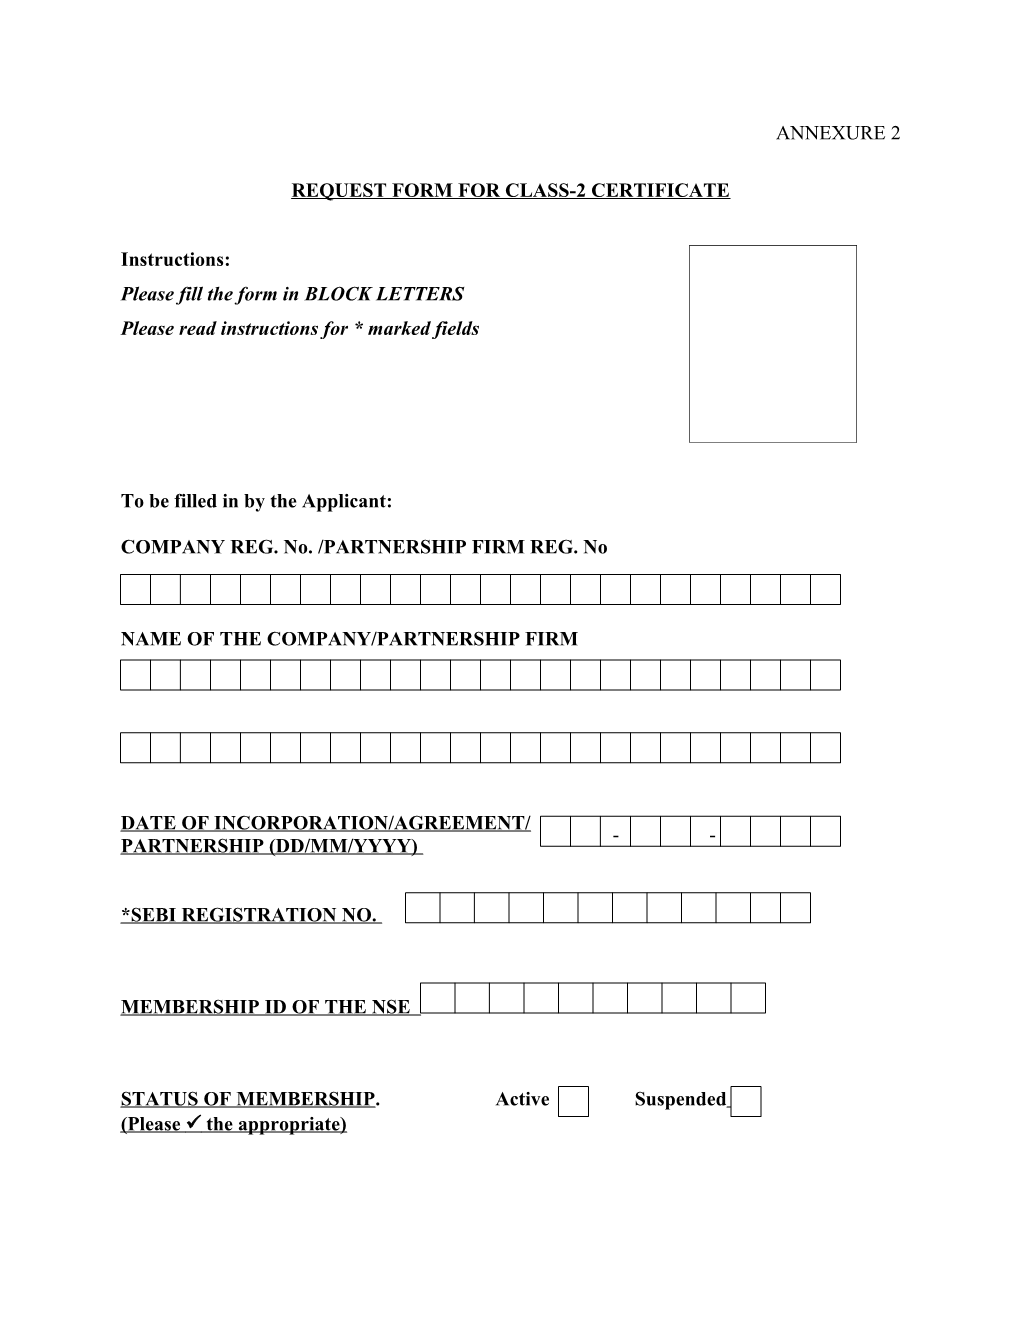 Request Form for Class-2 Certificate